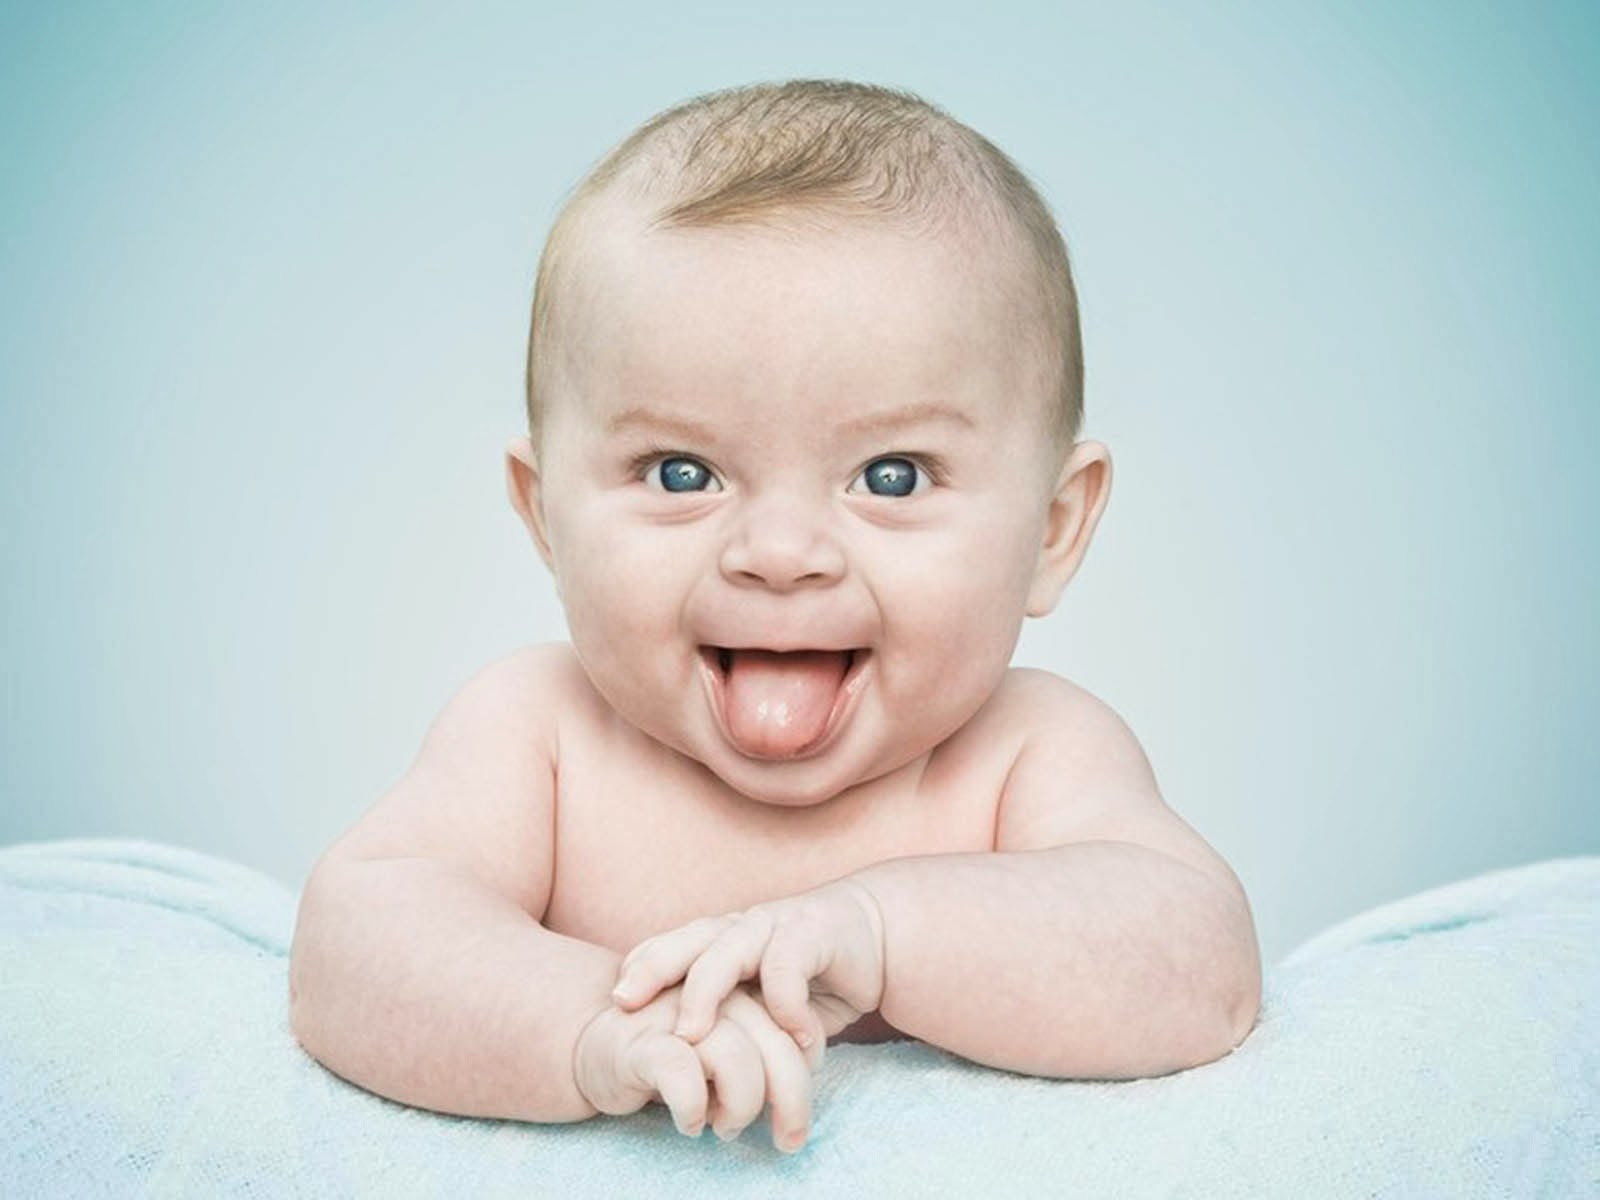 baby hd wallpapers 1080p,child,baby,face,facial expression,skin